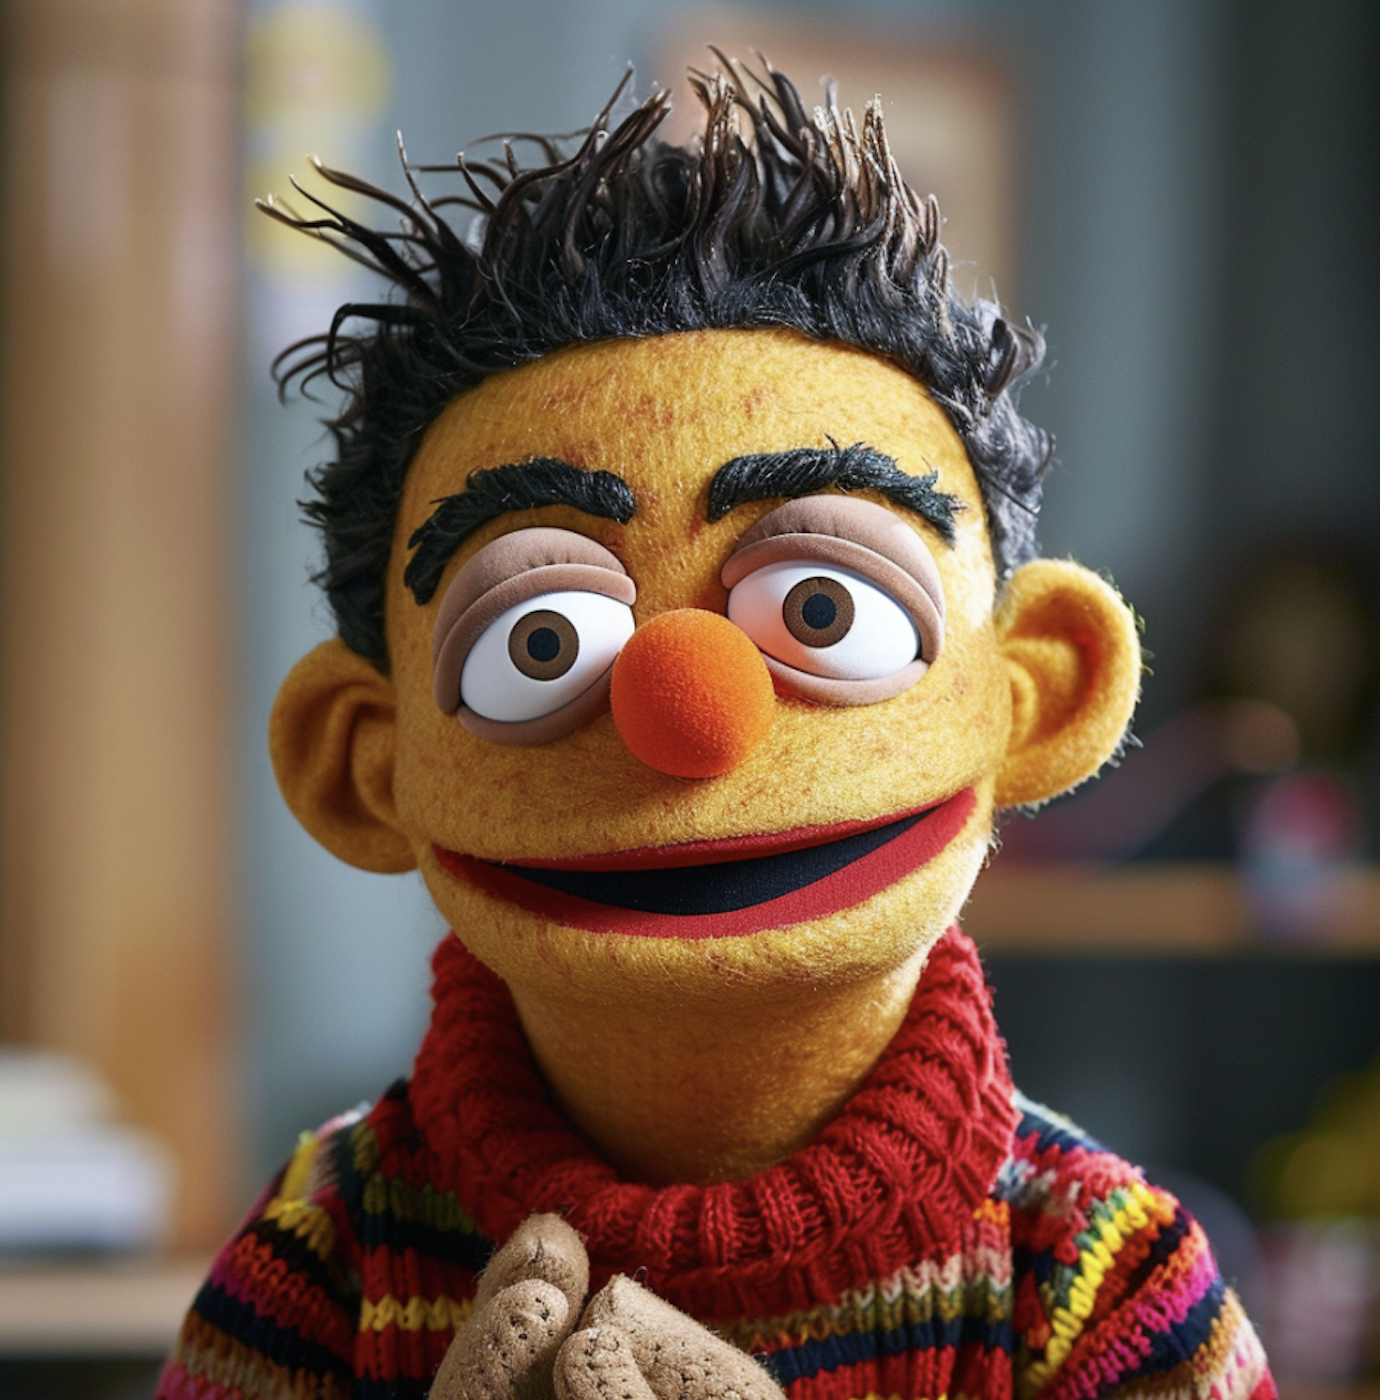 Muppet with dark, spiky hair, wearing a striped sweater and large eyes close together and turned down, looking forward with a slight smile